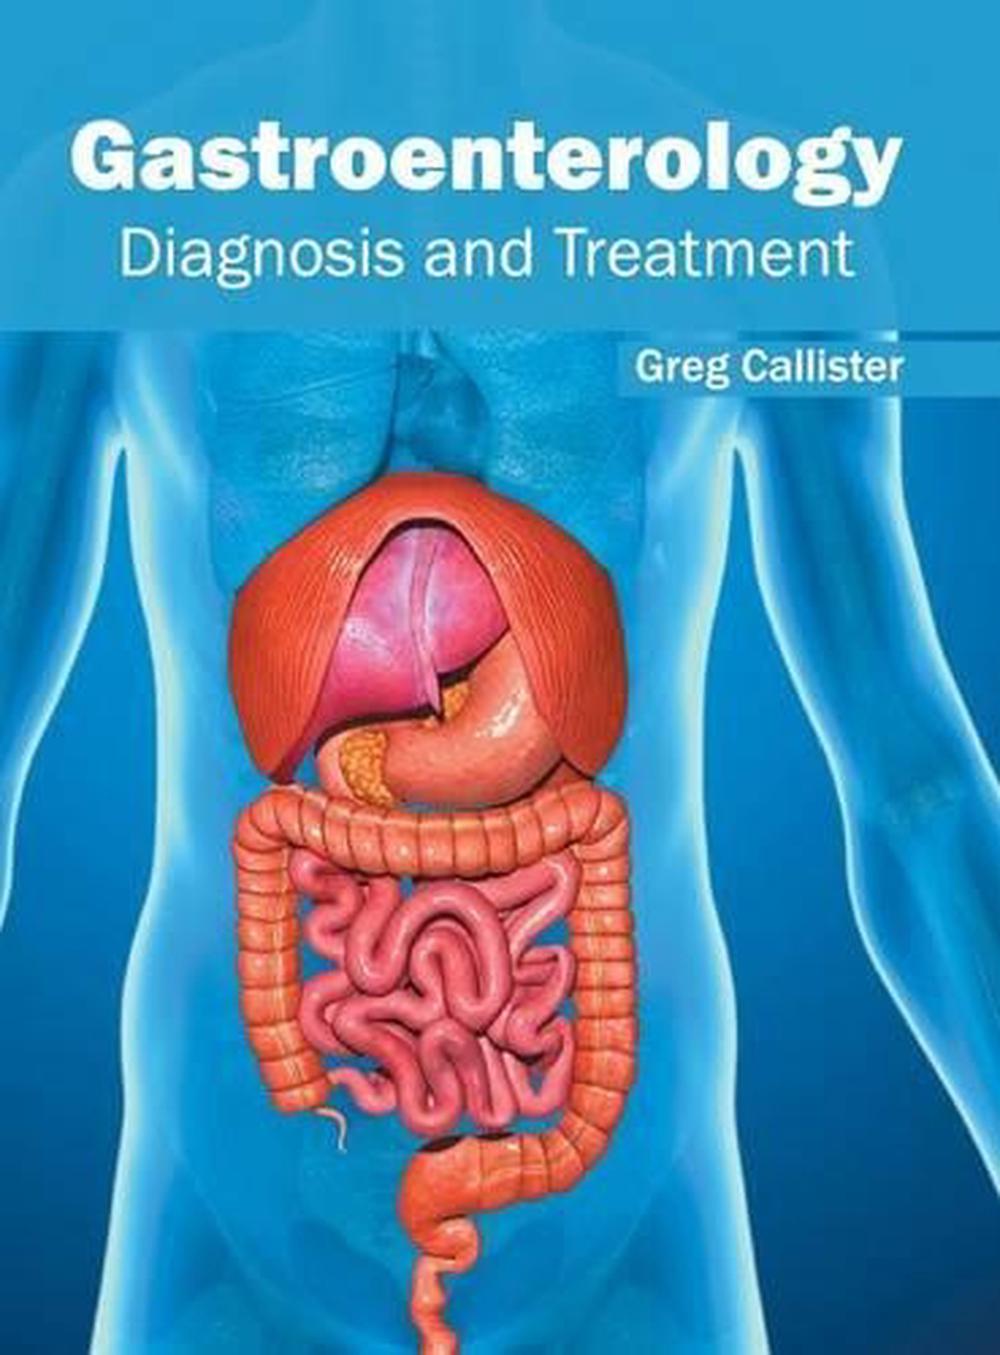 possible research topics in gastroenterology